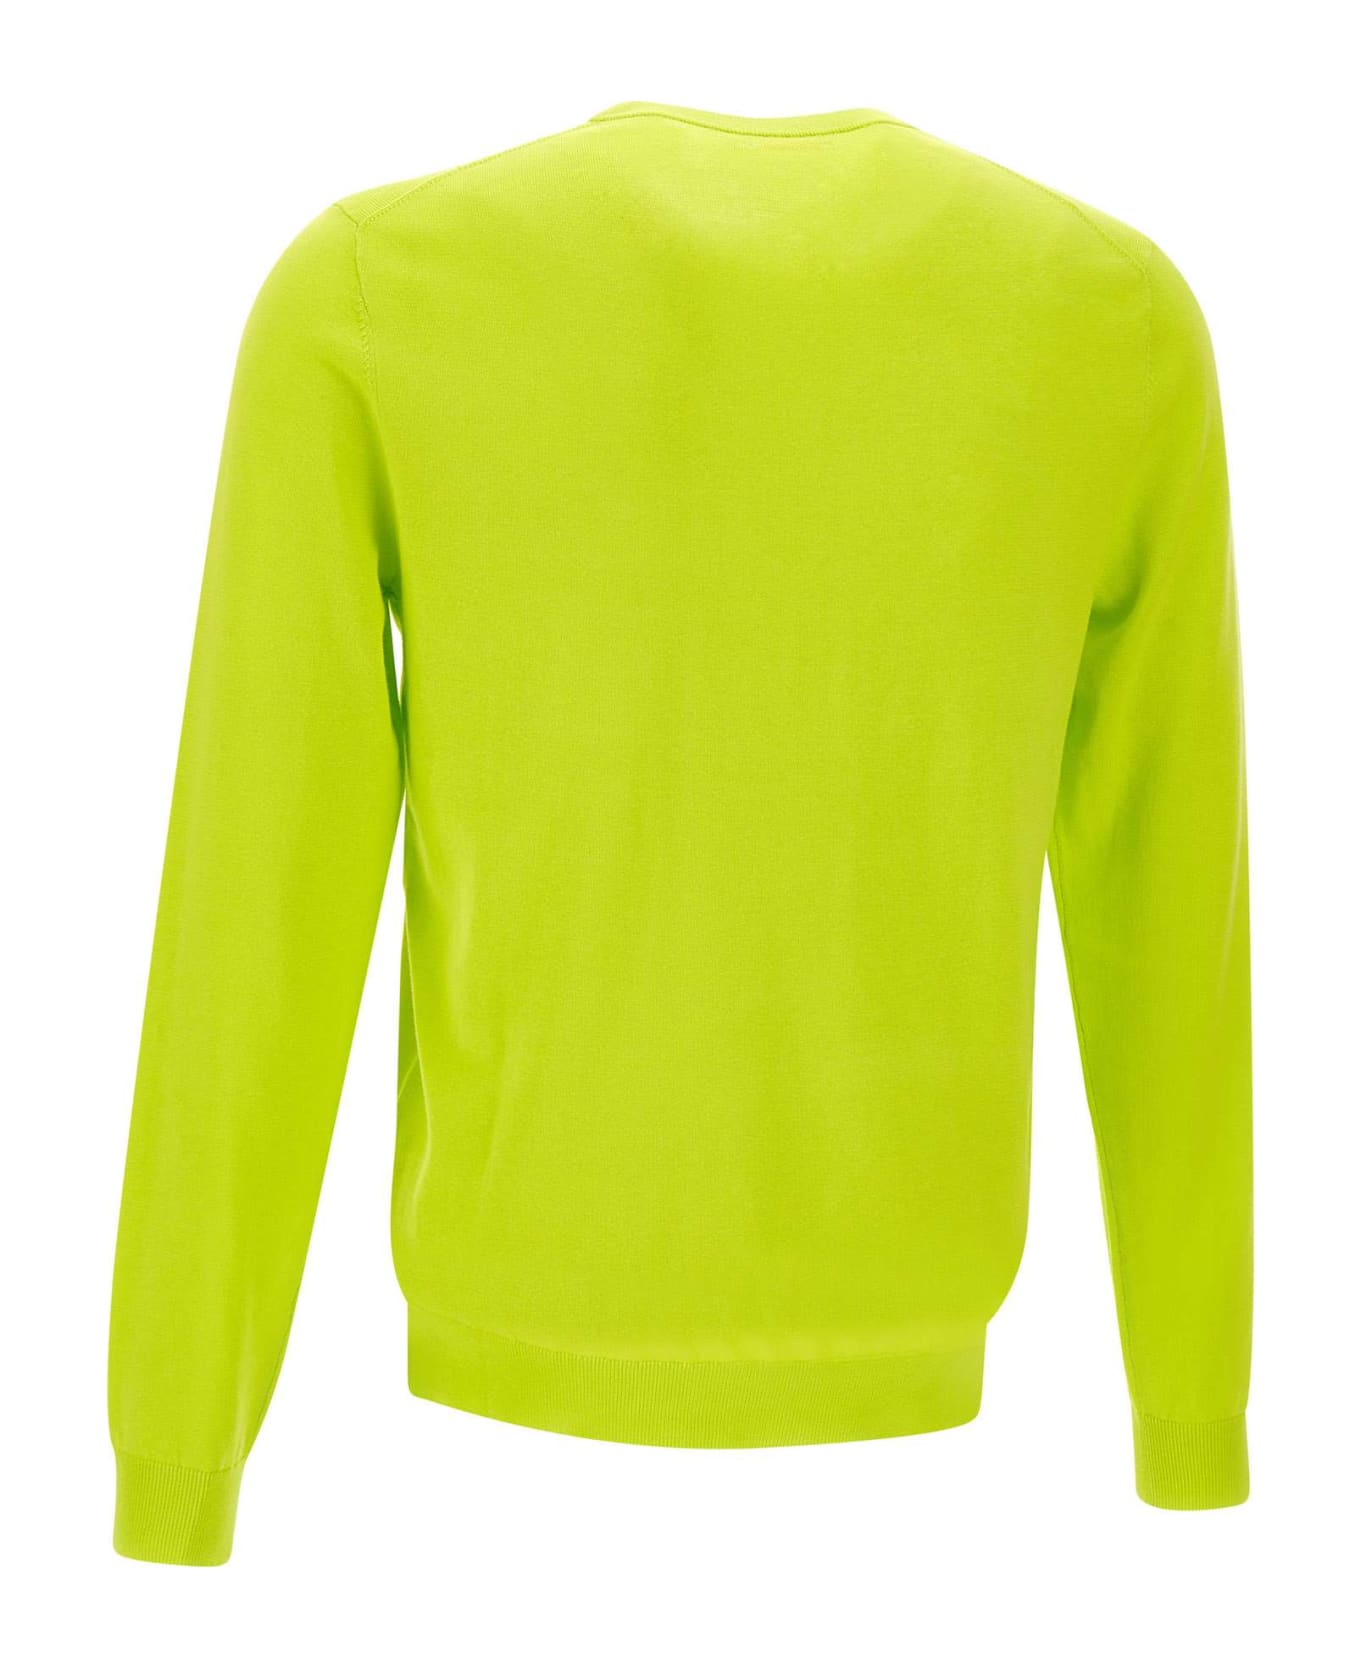 Sun 68 "solid" Cotton Sweater - GREEN